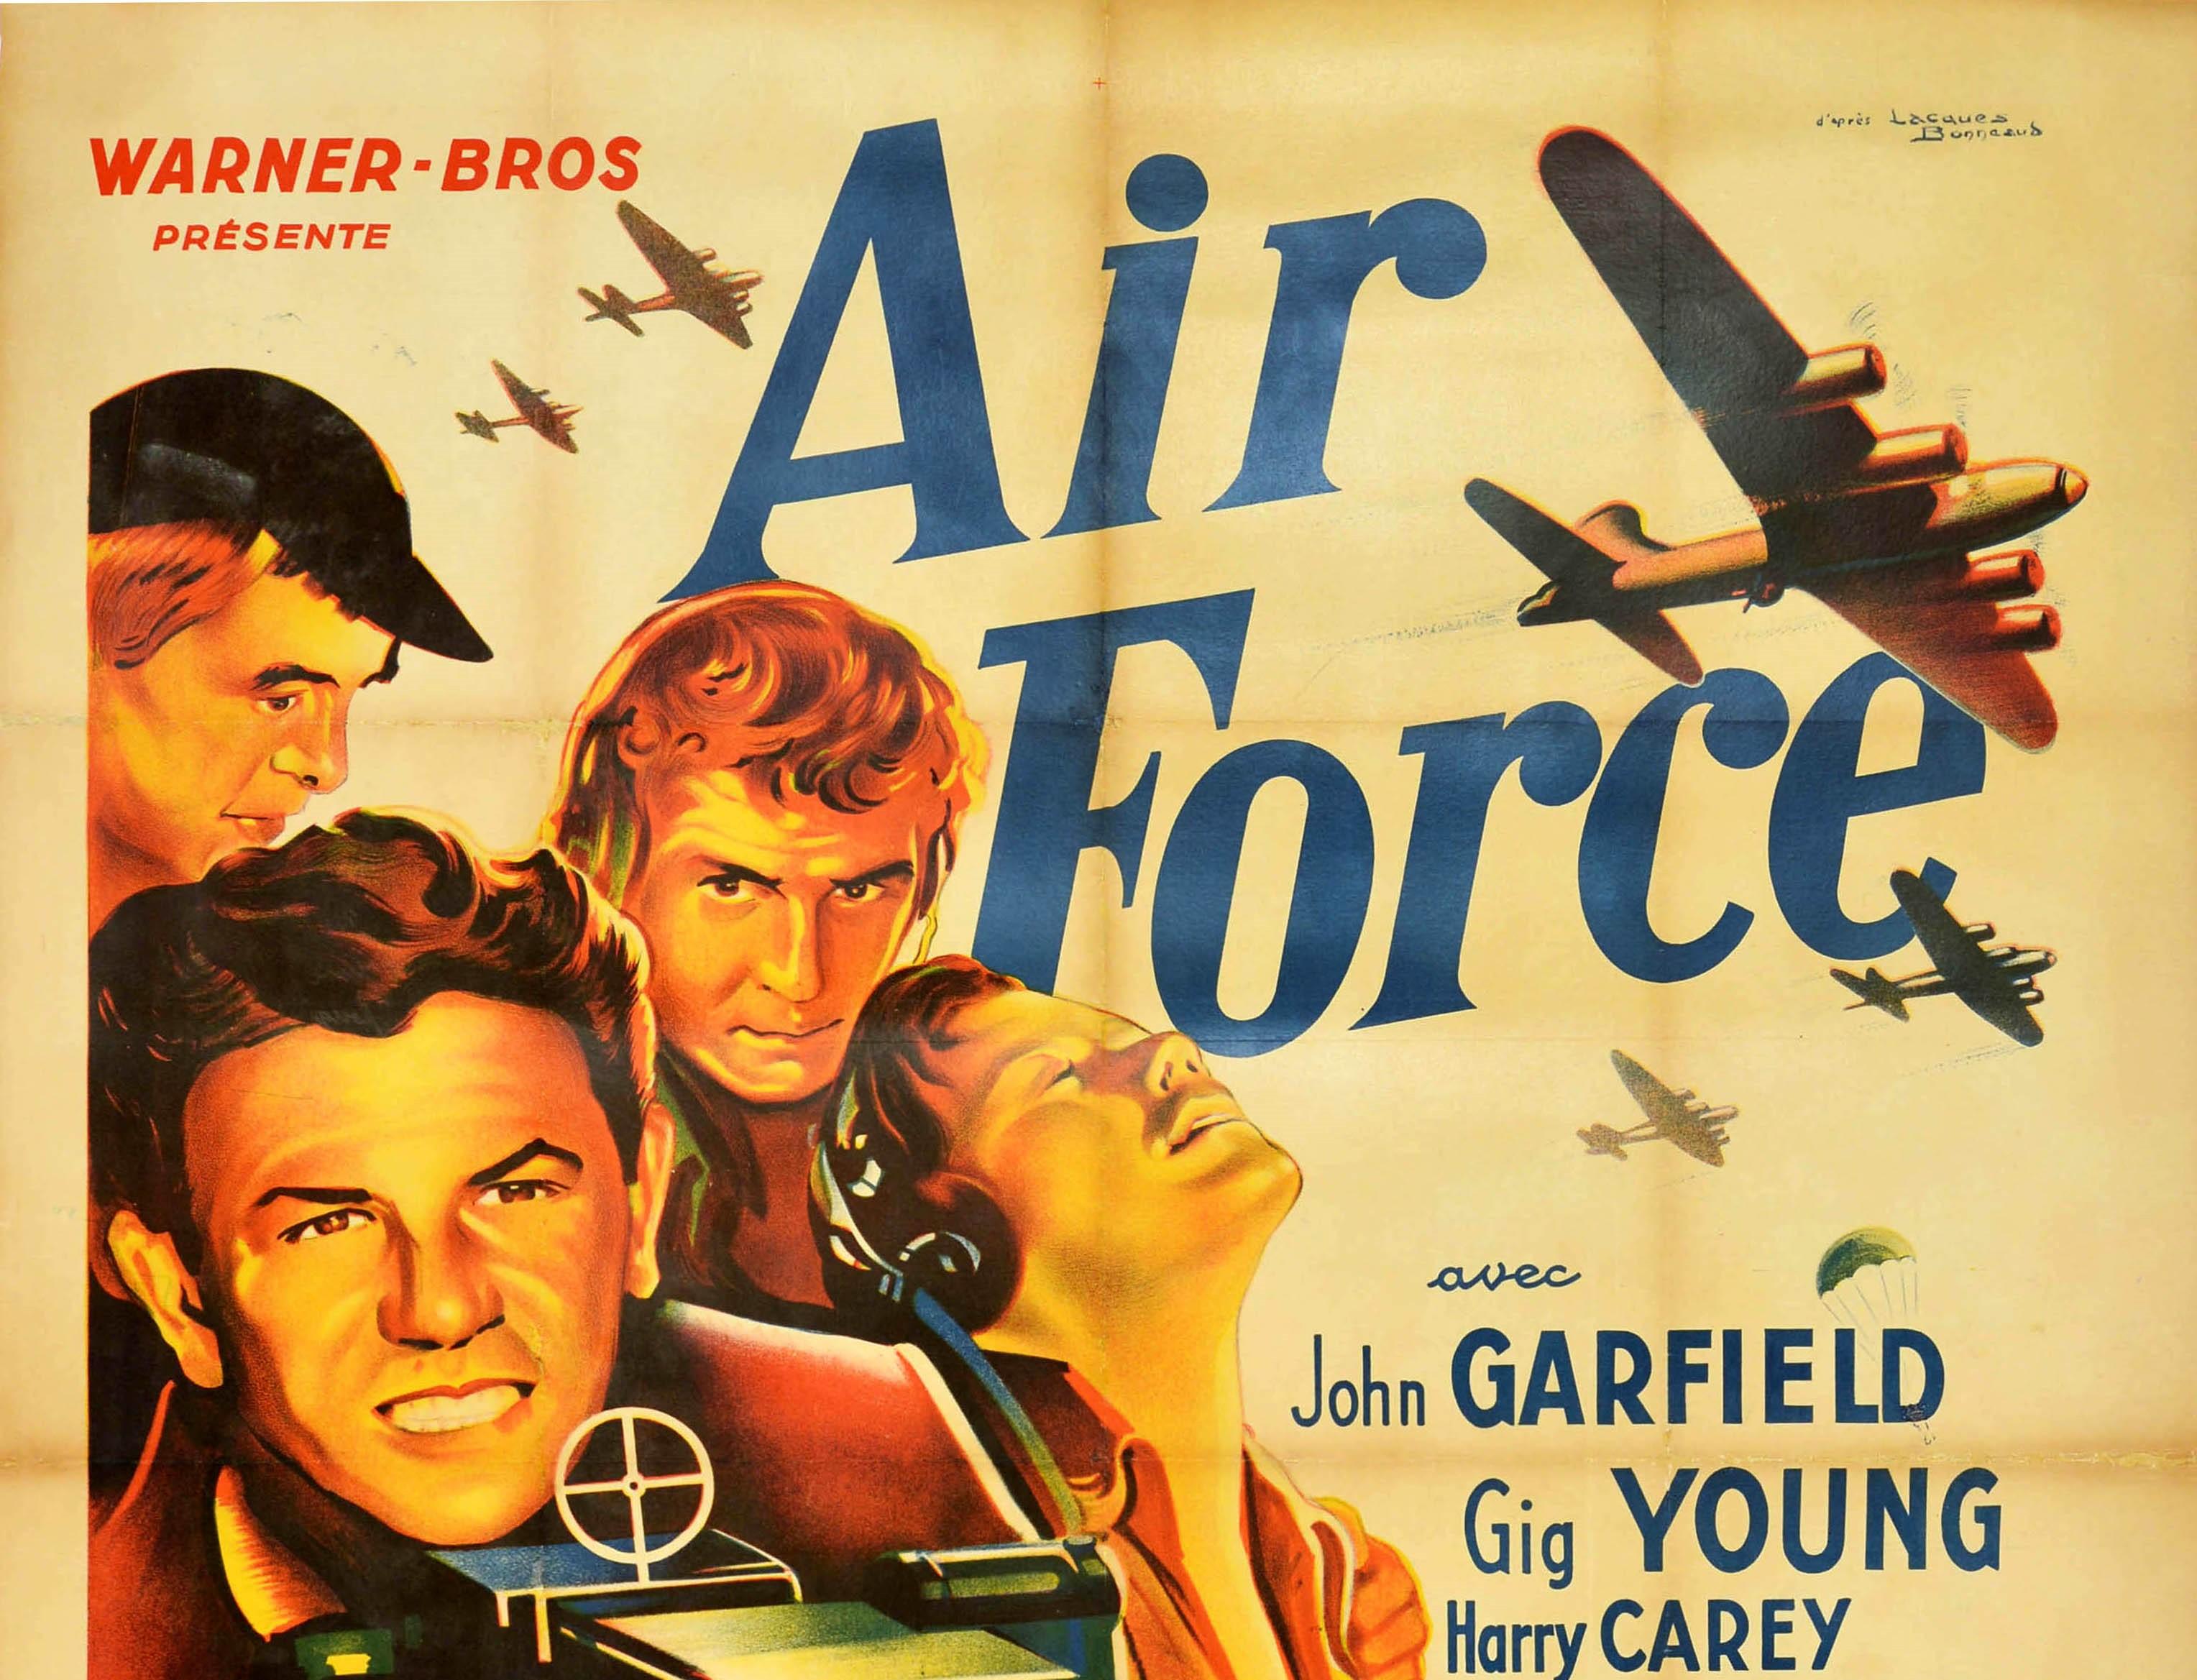 Original Vintage Movie Poster Air Force WWII Military Aviation Film Howard Hawks - Print by Unknown